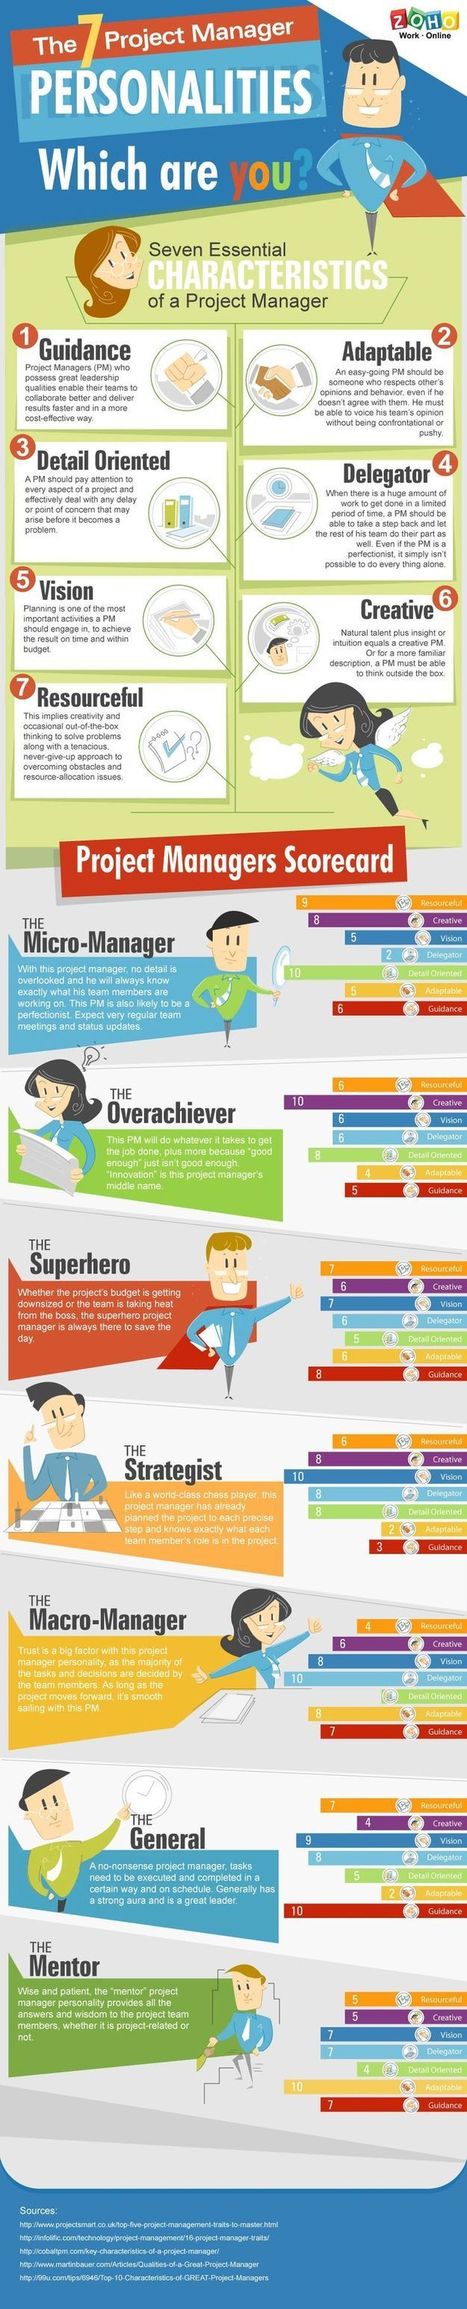 7 Project Manager Personalities-Which Are YOU? [Infographic] | business analyst | Scoop.it